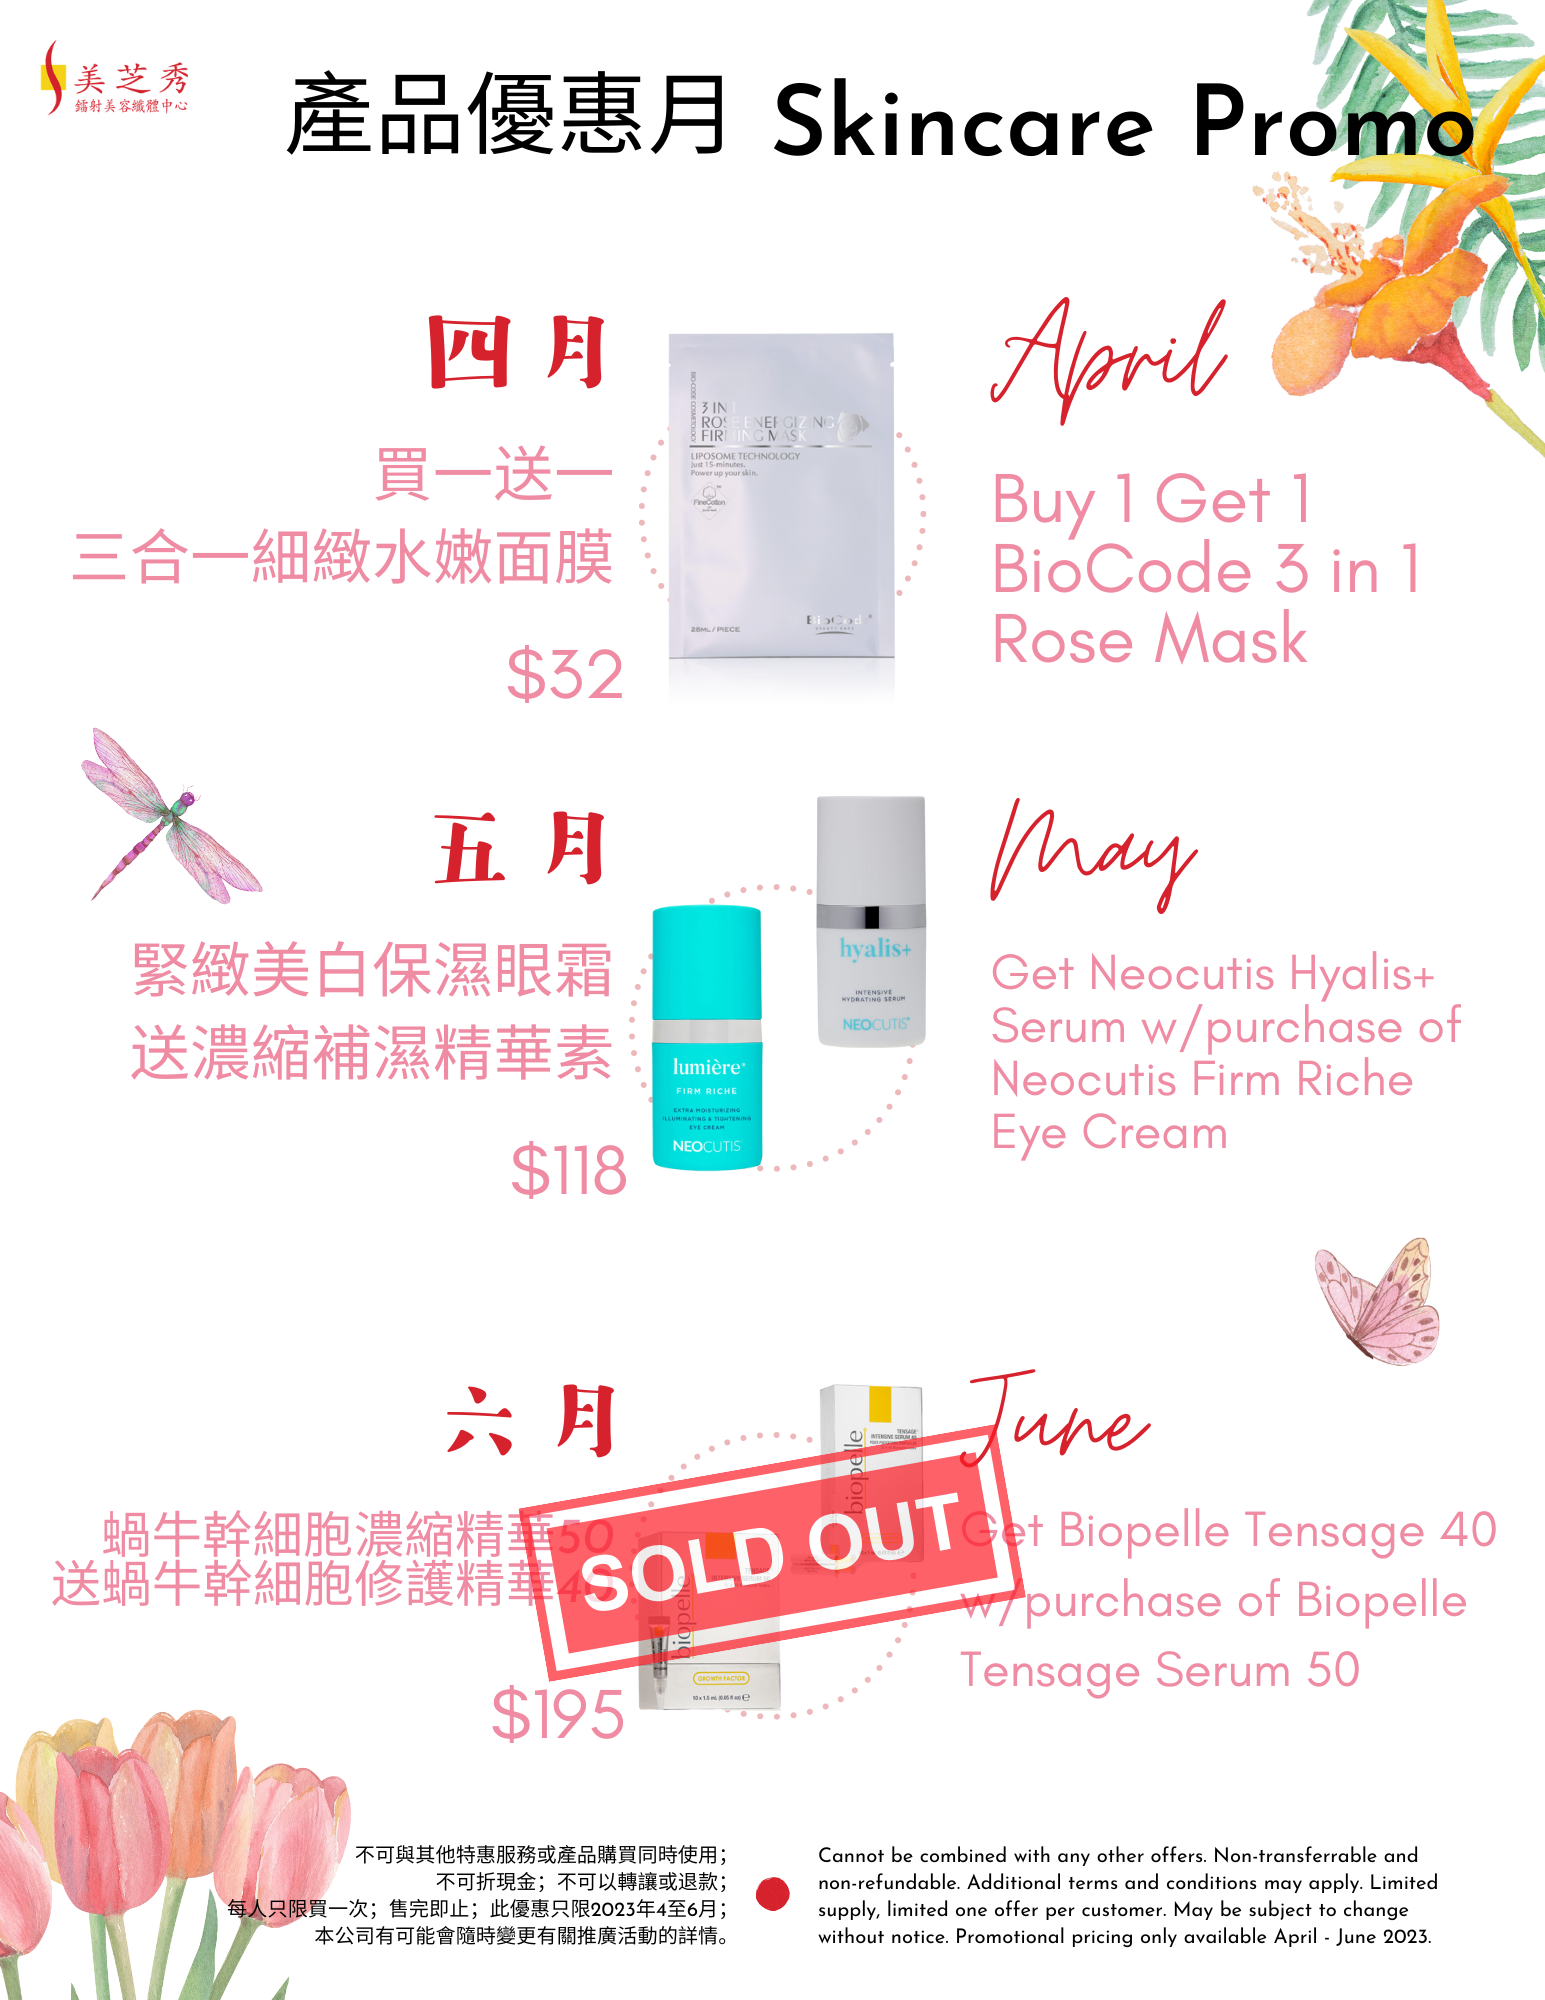 DSC 2023 Q2 BOGO and special offer skincare products from April to June 2023, with BioCode 3 in 1 Rose Energizing Firming Sheet Masks, Neocutis Lumiere Riche Eye Cream, Neocutis Hyalis+ Serum, & Sold Out Biopelle Tensage 50 and Biopelle Tensage 40 products from top to bottom and summer motif of flowers and butterflies